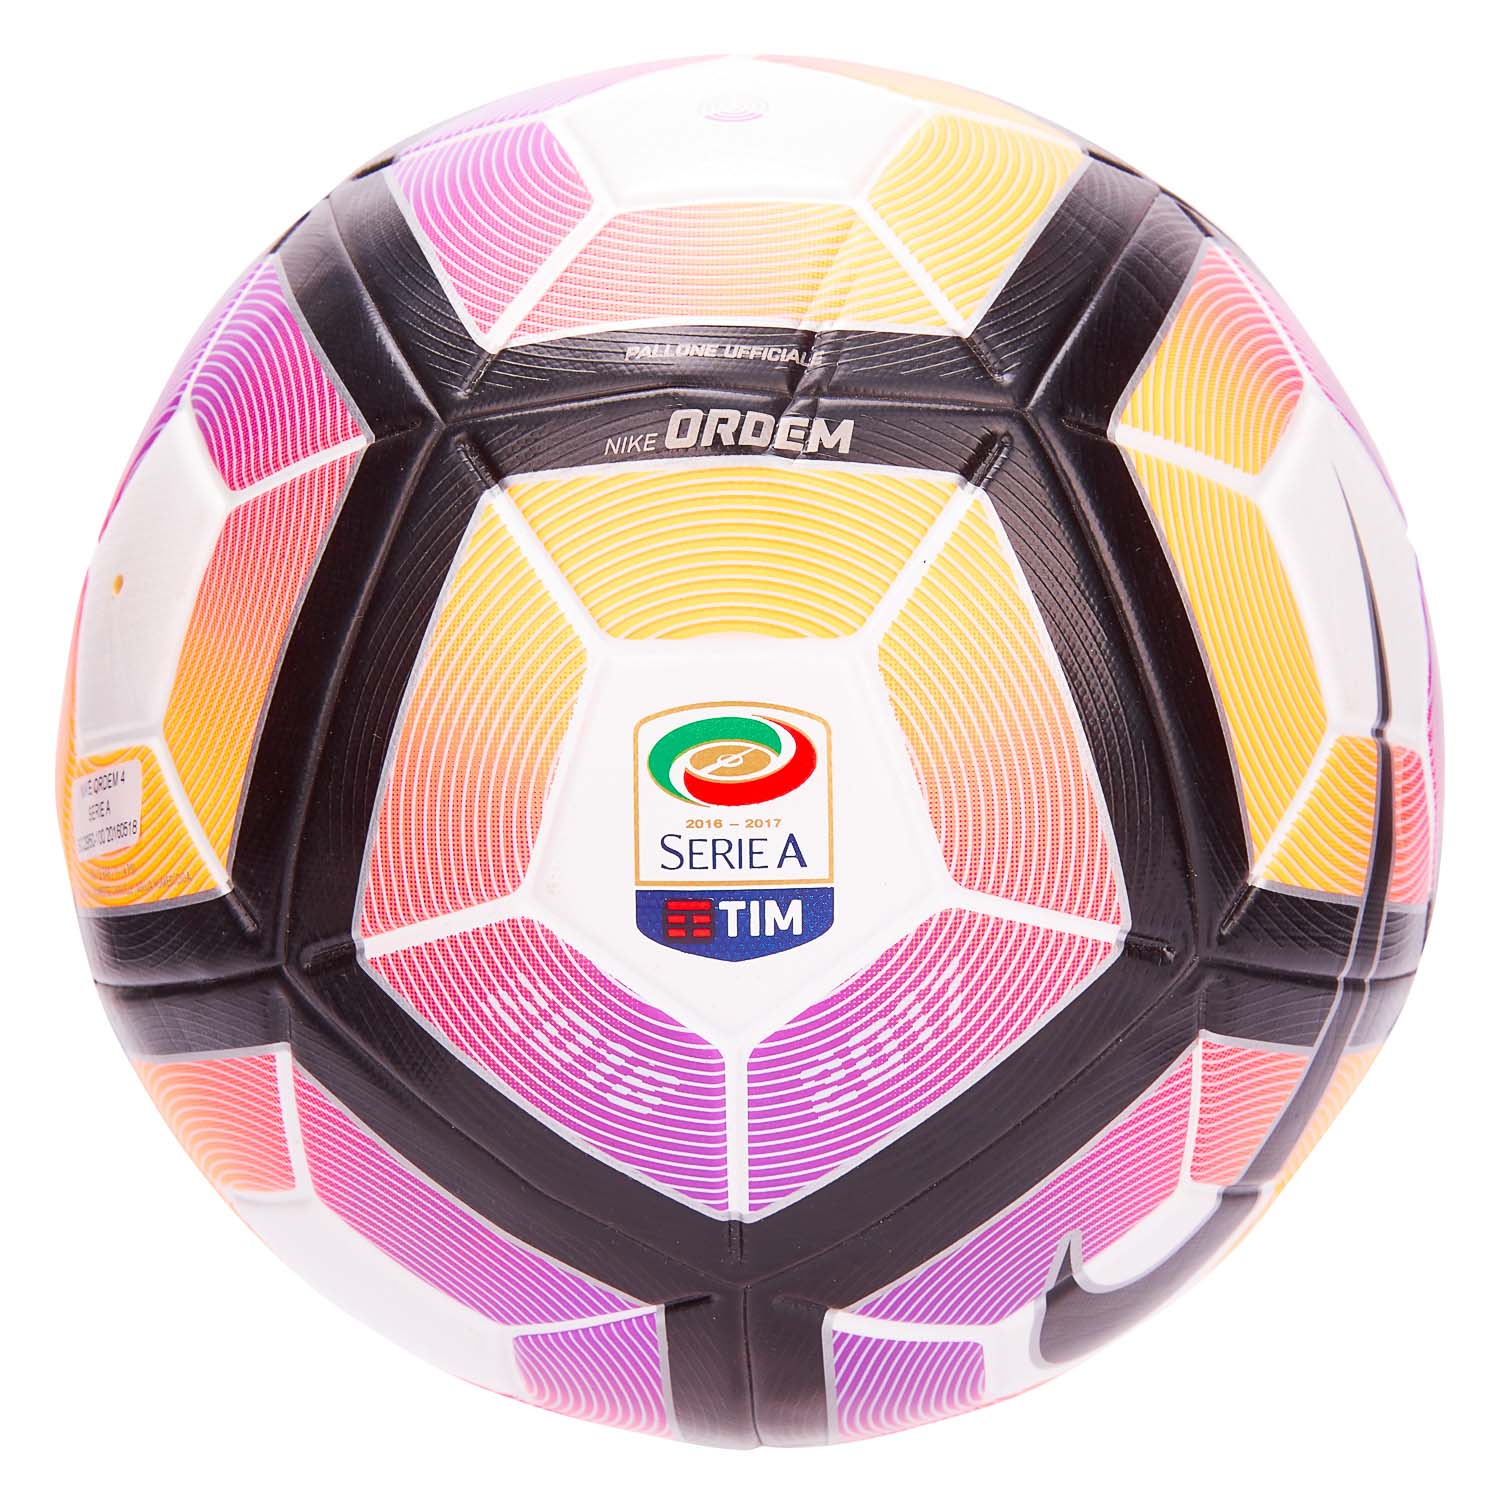 microscoop moreel eiwit 2016-17 Nike Ordem Official Serie A Match Ball - NEW - (Size 5)